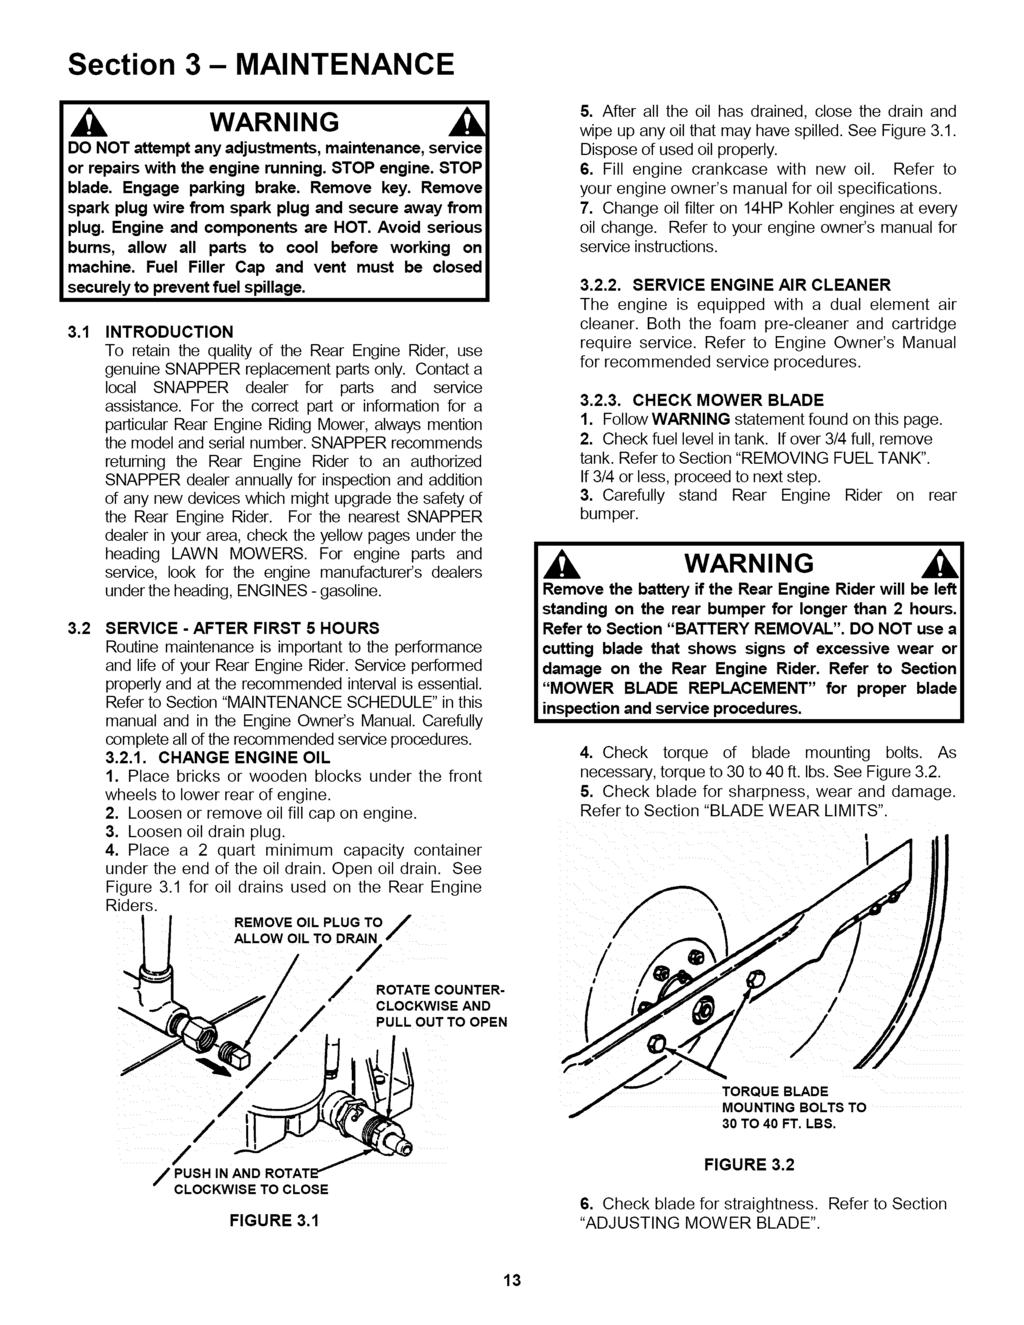 Section 3- MAINTENANCE DO NOT attempt any adjustments, maintenance, service or repairs with the engine running. STOP engine. STOP blade. Engage parking brake. Remove key.